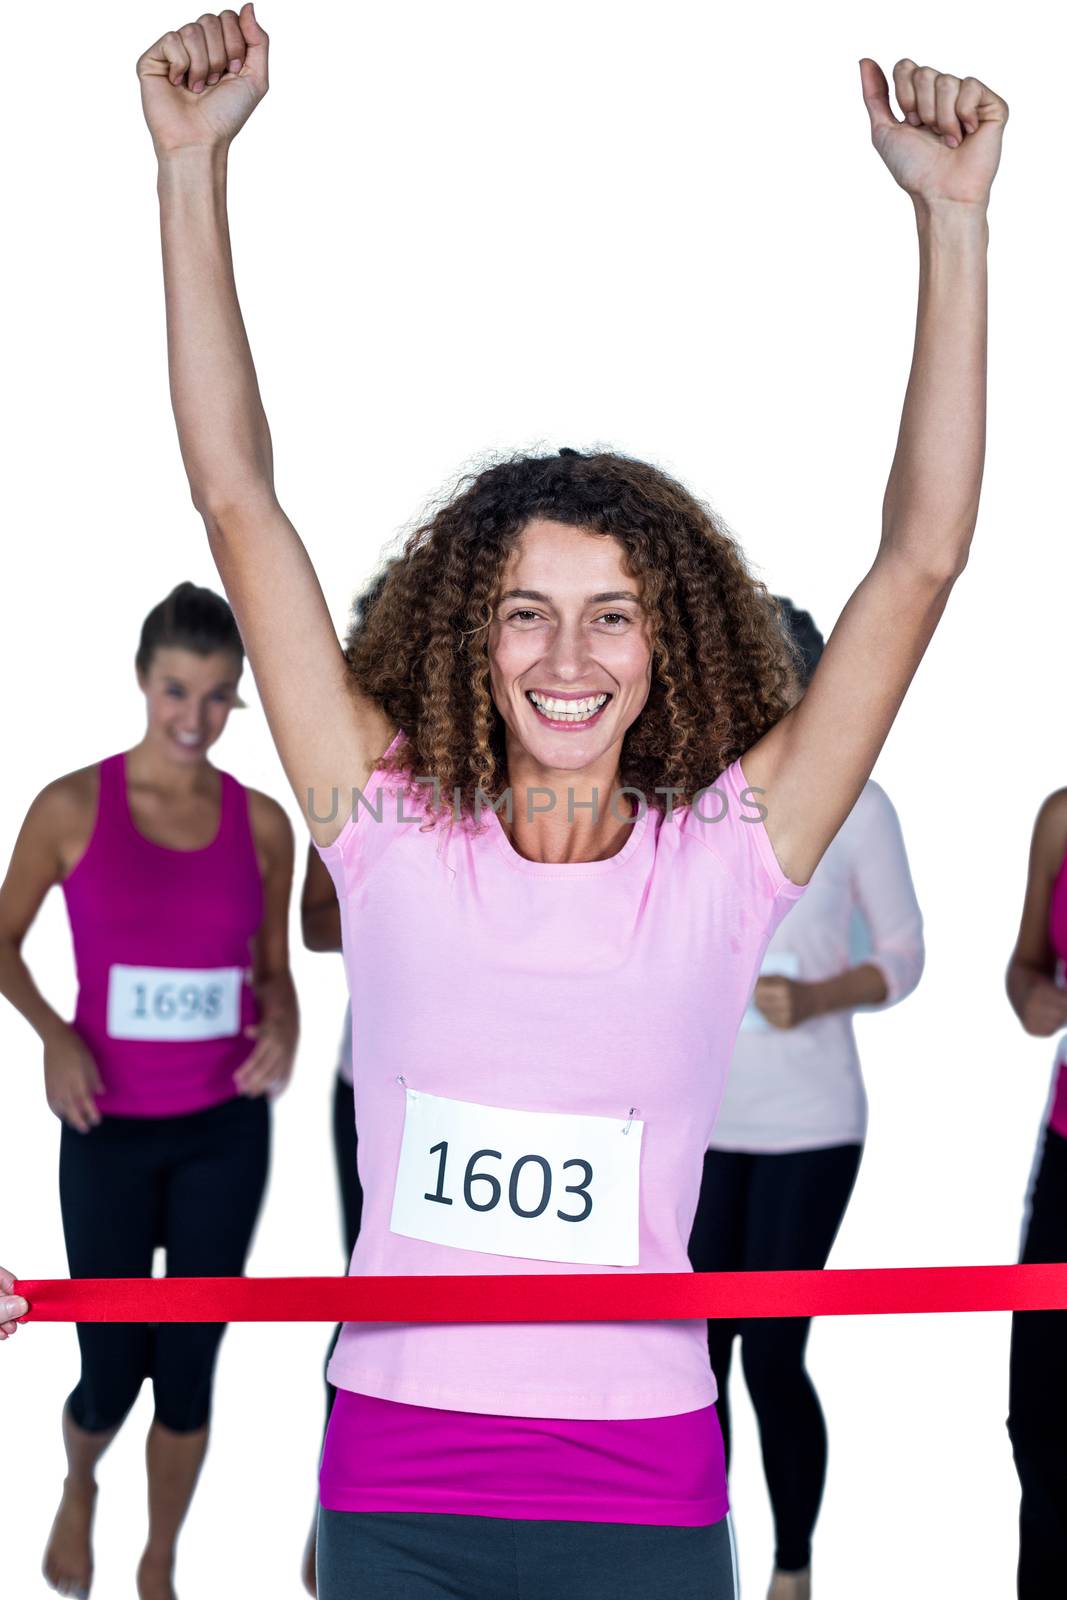 Portrait of smiling winner female athlete crossing finish line with arms raised against white background